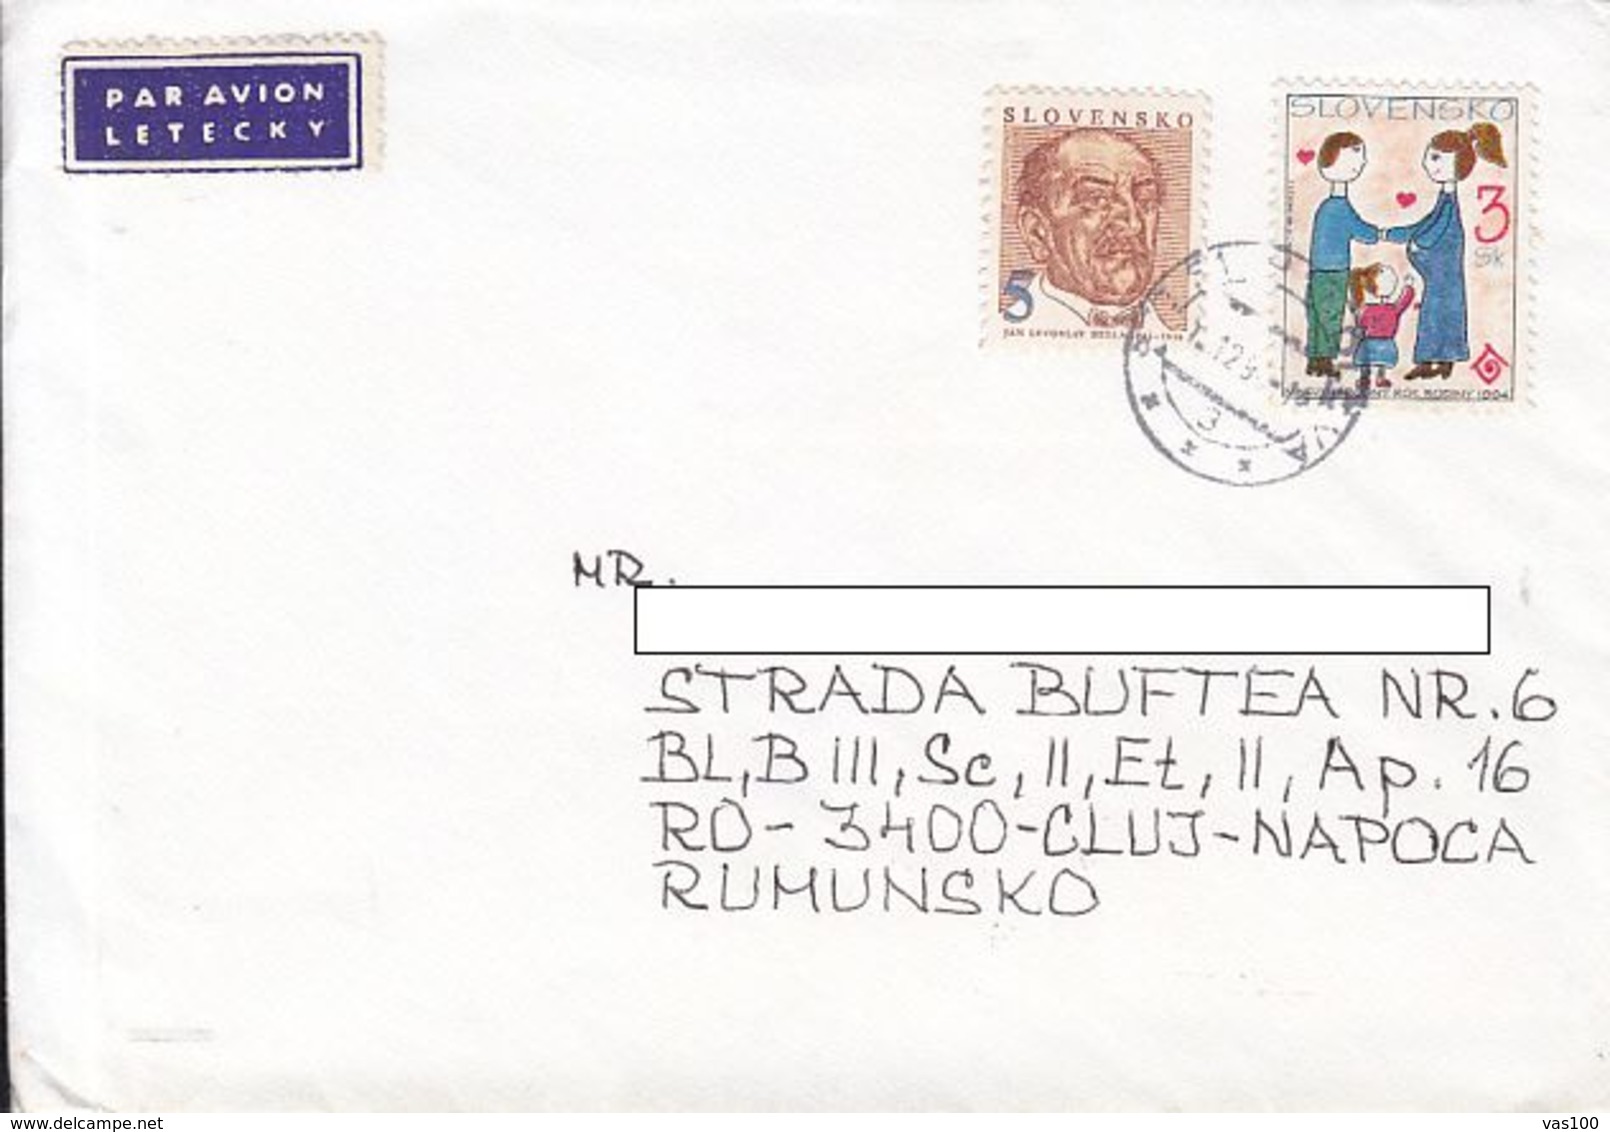 JAN LEVOSLAV BELLA, FAMILY, STAMPS ON COVER, 1995, SLOVAKIA - Covers & Documents